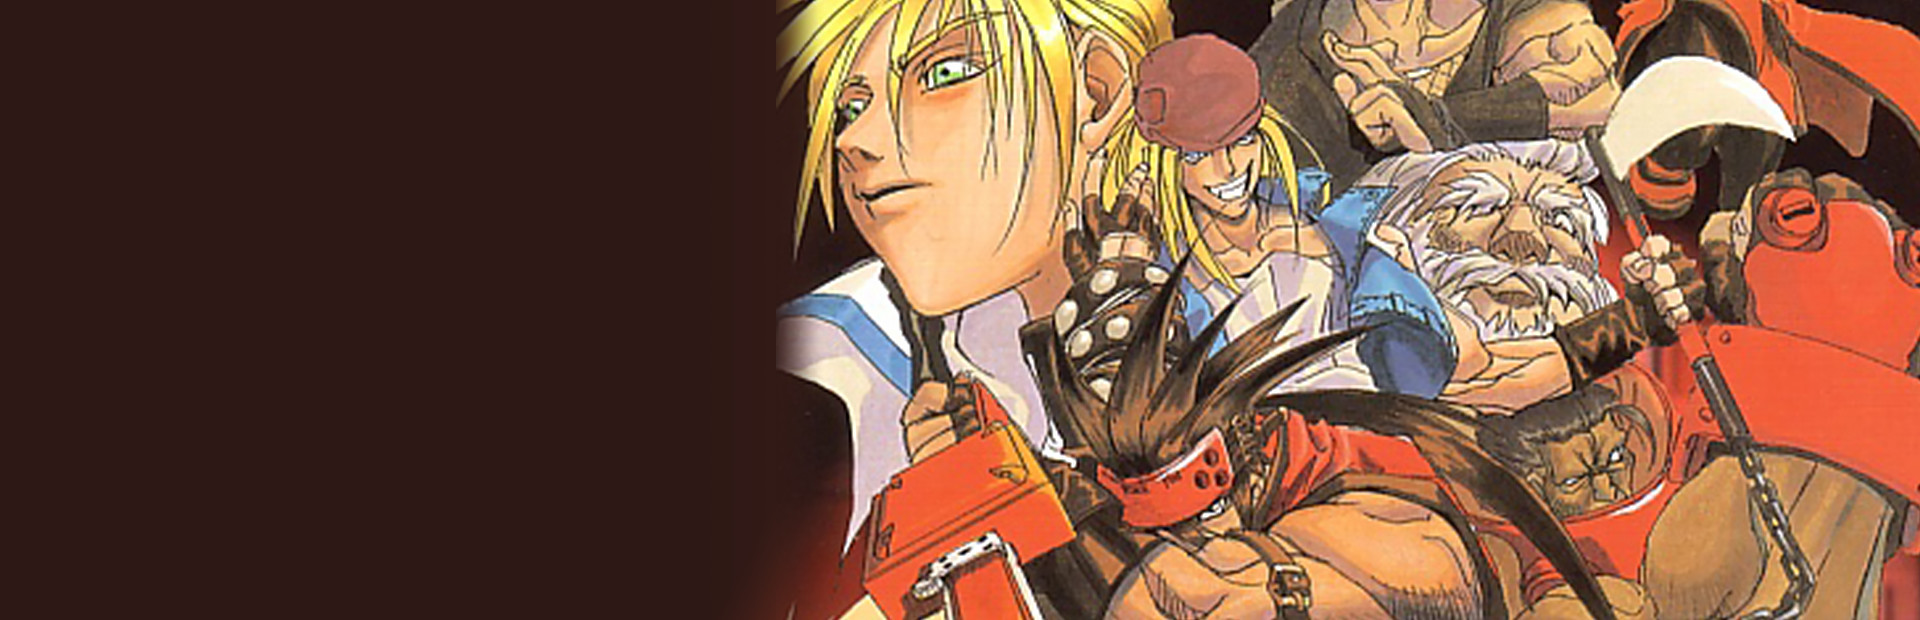 GUILTY GEAR cover image